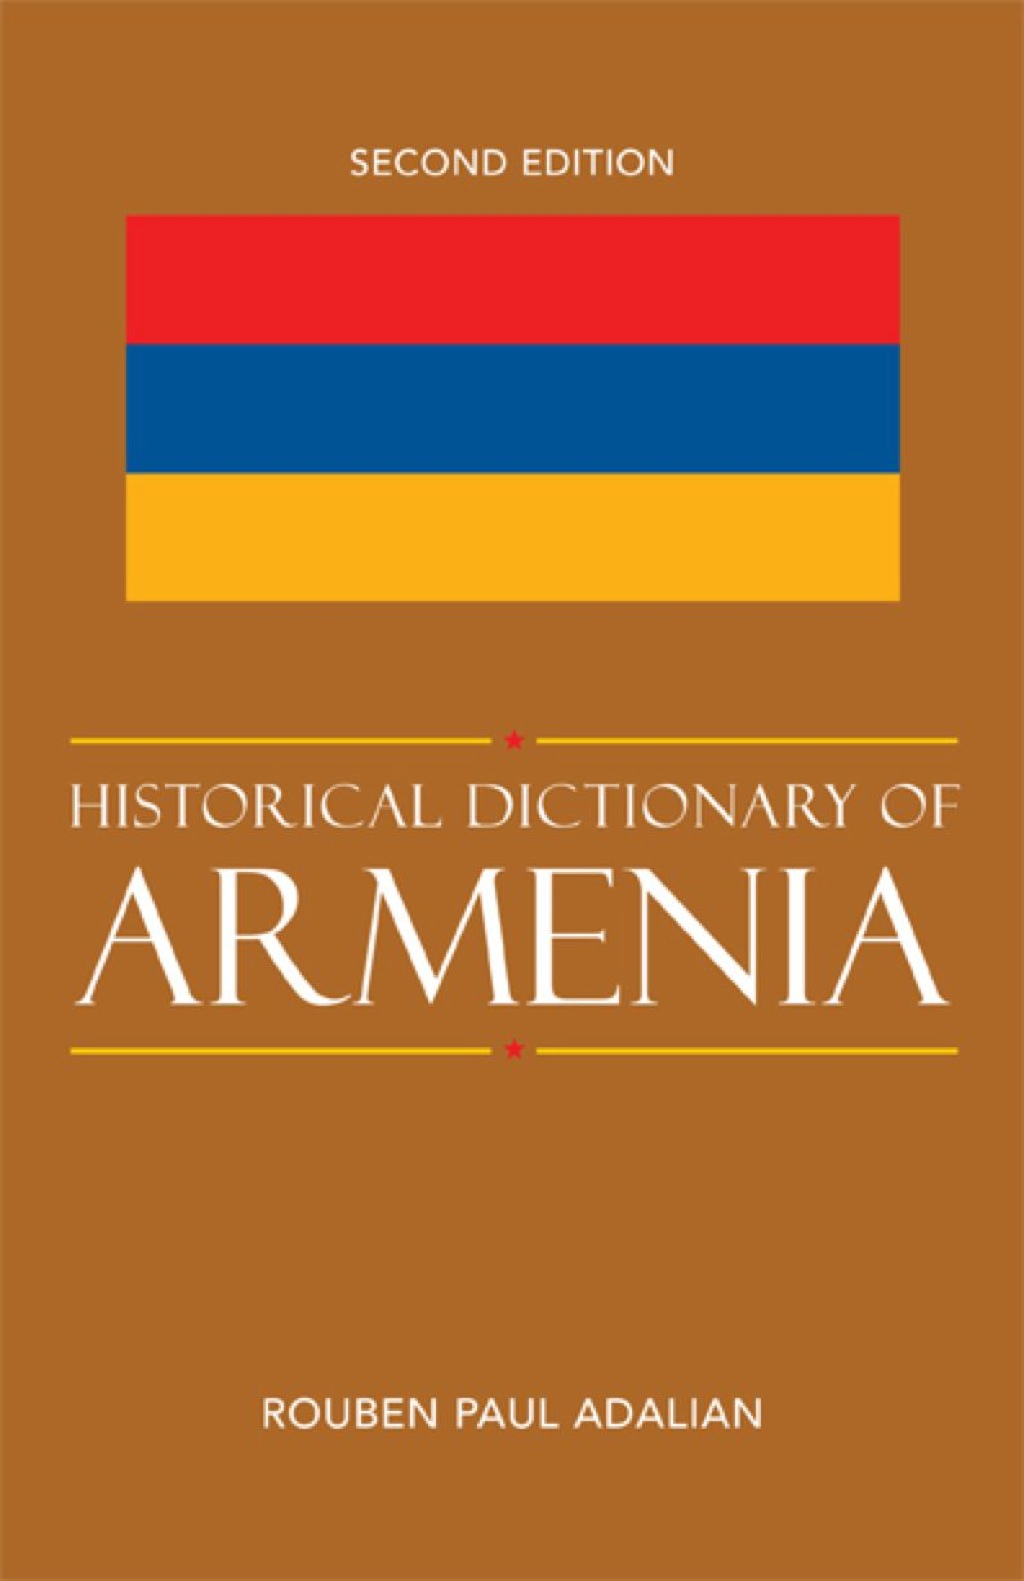 Historical Dictionary of Armenia - 2nd Edition (eBook Rental)